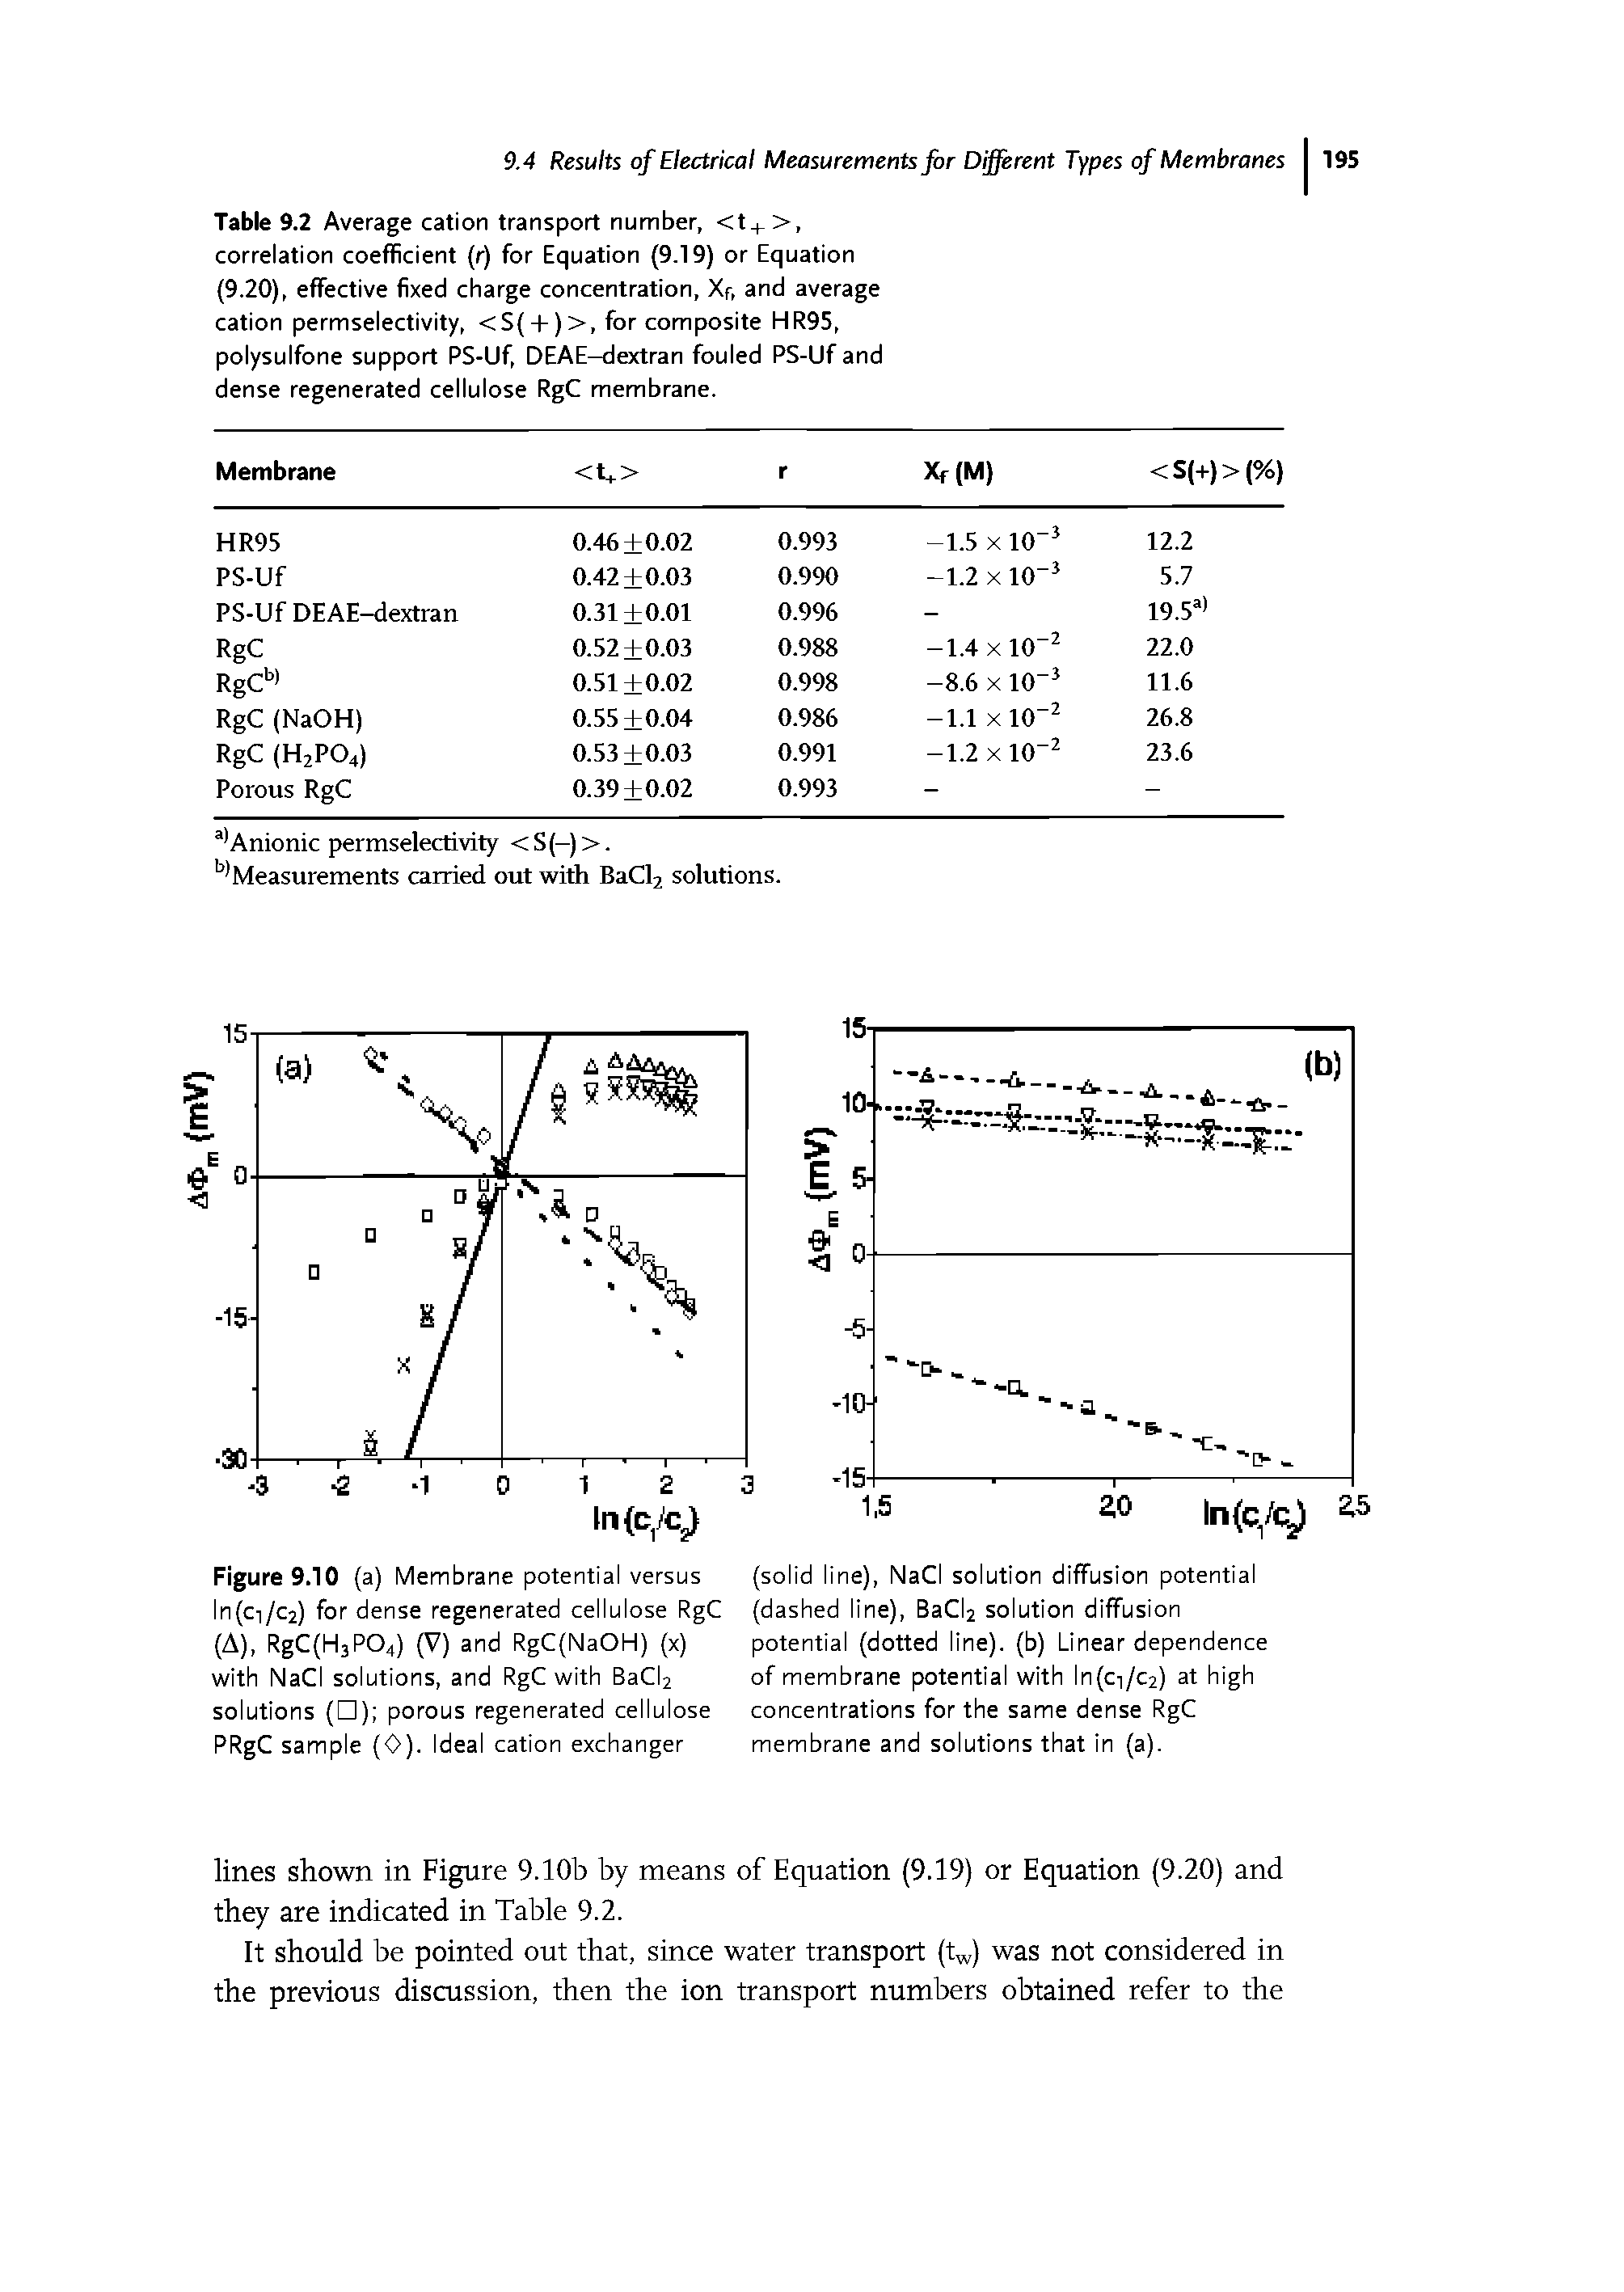 Table 9.2 Average cation transport number, <t+>, correlation coefficient (r) for Equation (9.19) or Equation (9.20), effective fixed charge concentration, Xf, and average cation permselectivity, <S( + )>, for composite HR95, polysulfone support PS-Uf, DEAE-dextran fouled PS-Uf and dense regenerated cellulose RgC membrane.